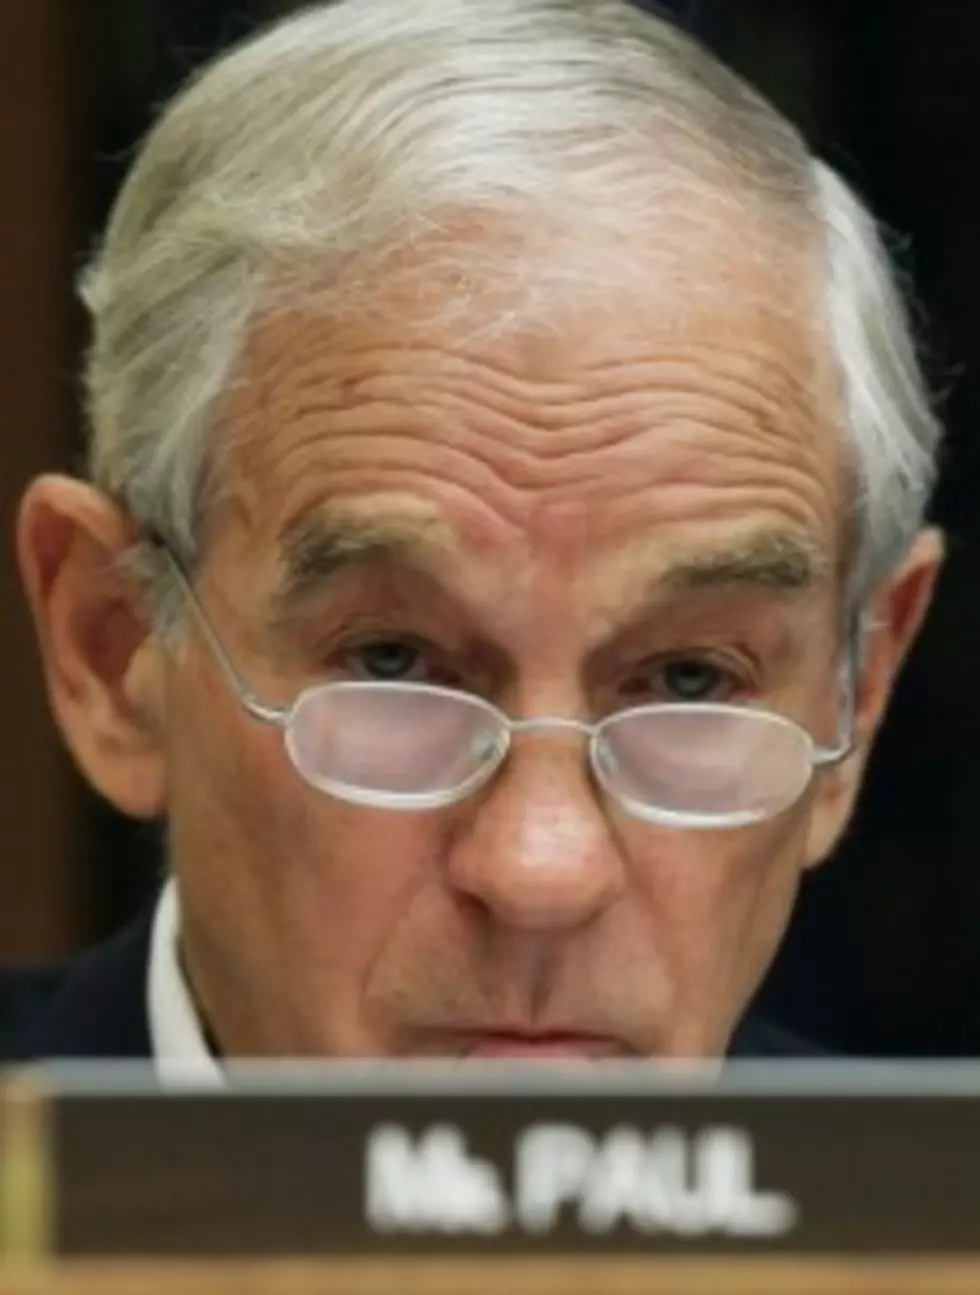 Republican Presidential Hopeful Ron Paul Announces He Will Not Seek Reelection for Congressional Seat